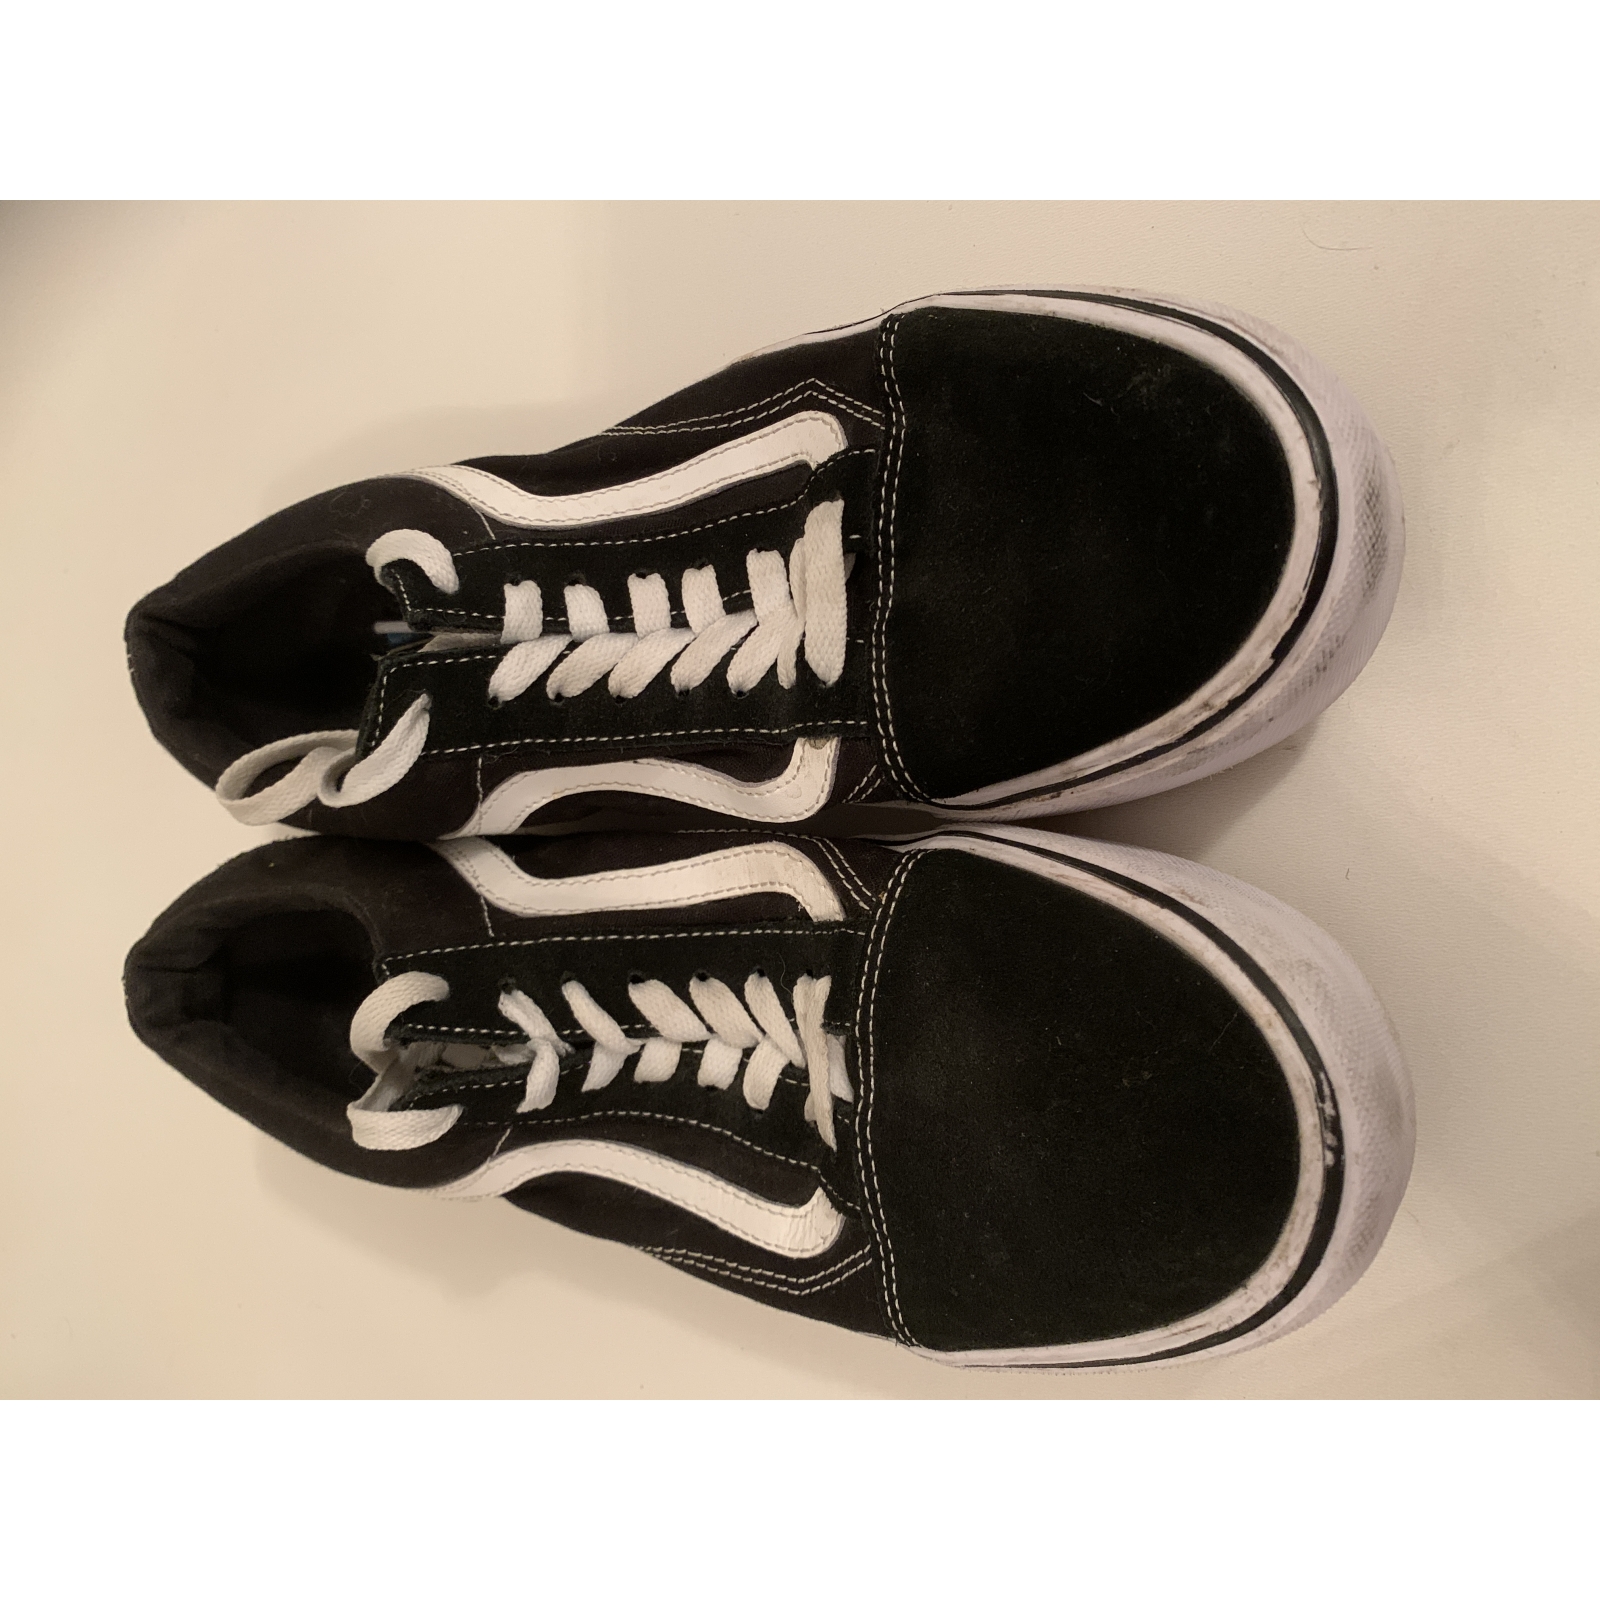 Vans Black and White Old Skool Mens Trainers Size Uk 9.5 721356 - Spare